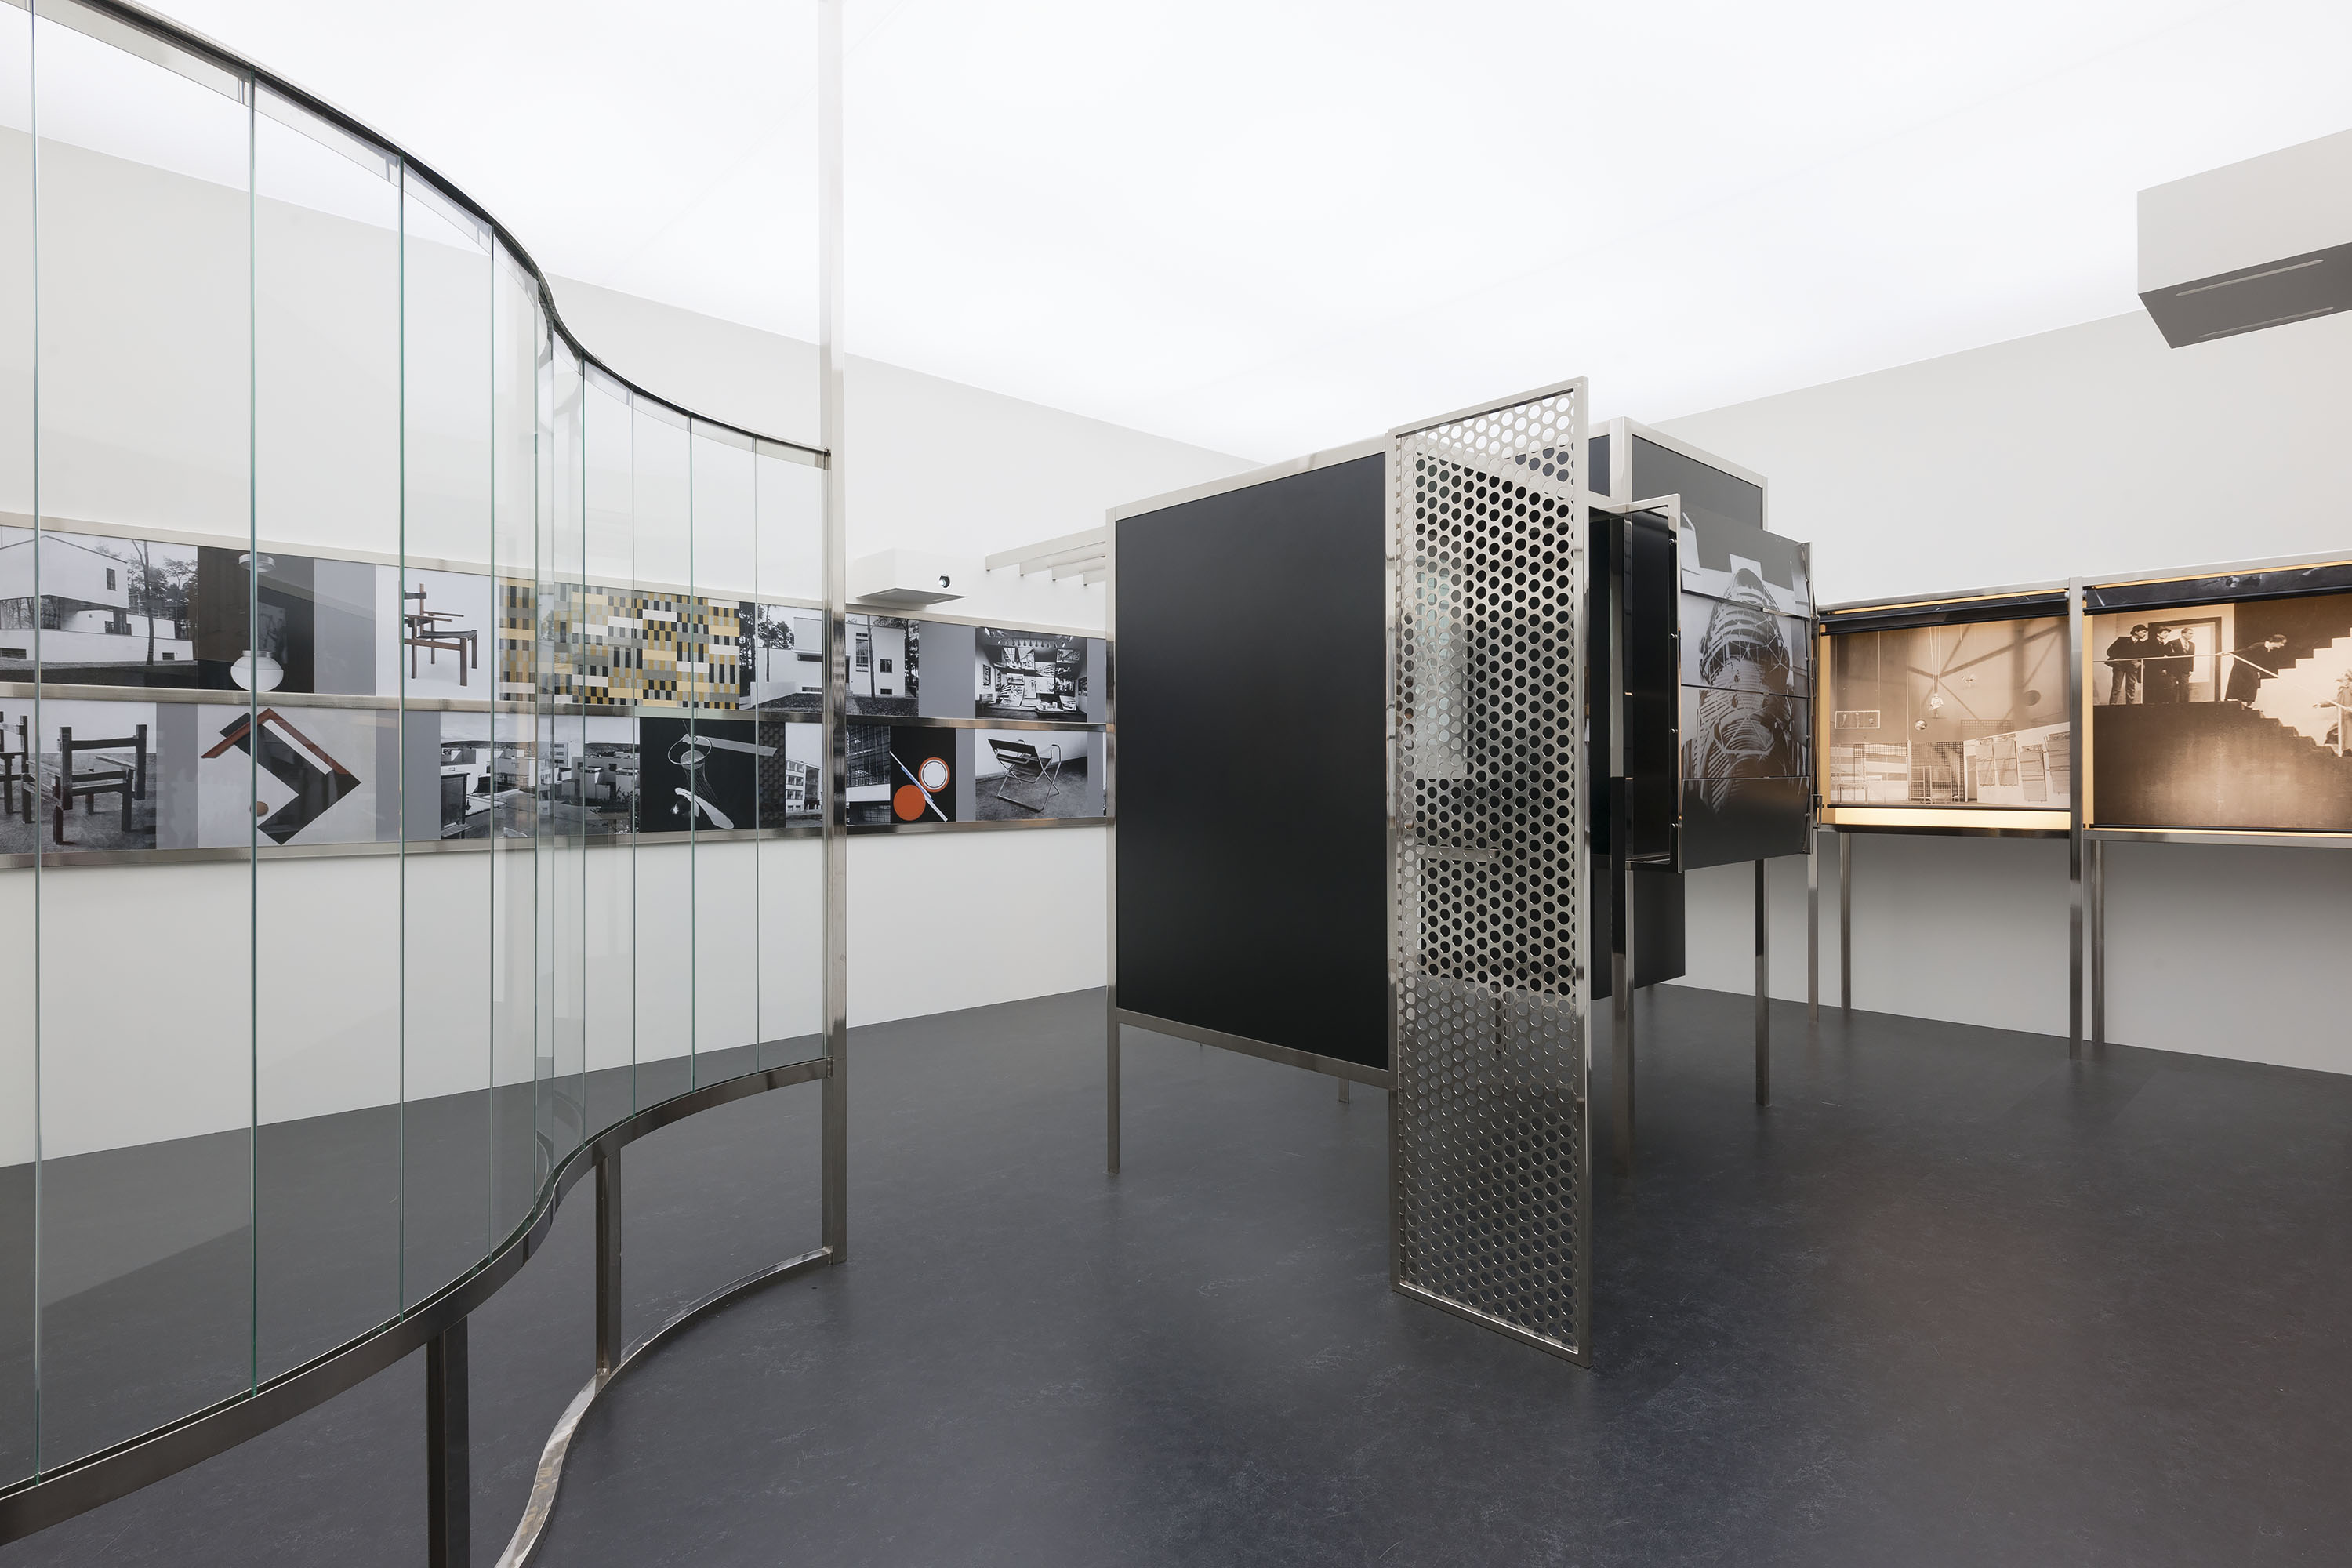 László Moholy-Nagy. “Room of the Present,” constructed 2009 from plans and other documentation dated 1930. Van Abbemuseum, Eindhoven, 2953. © 2016 Hattula Moholy-Nagy/VG Bild-Kunst, Bonn/Artists Rights Society (ARS), New York. Image courtesy the Art Institute of Chicago.